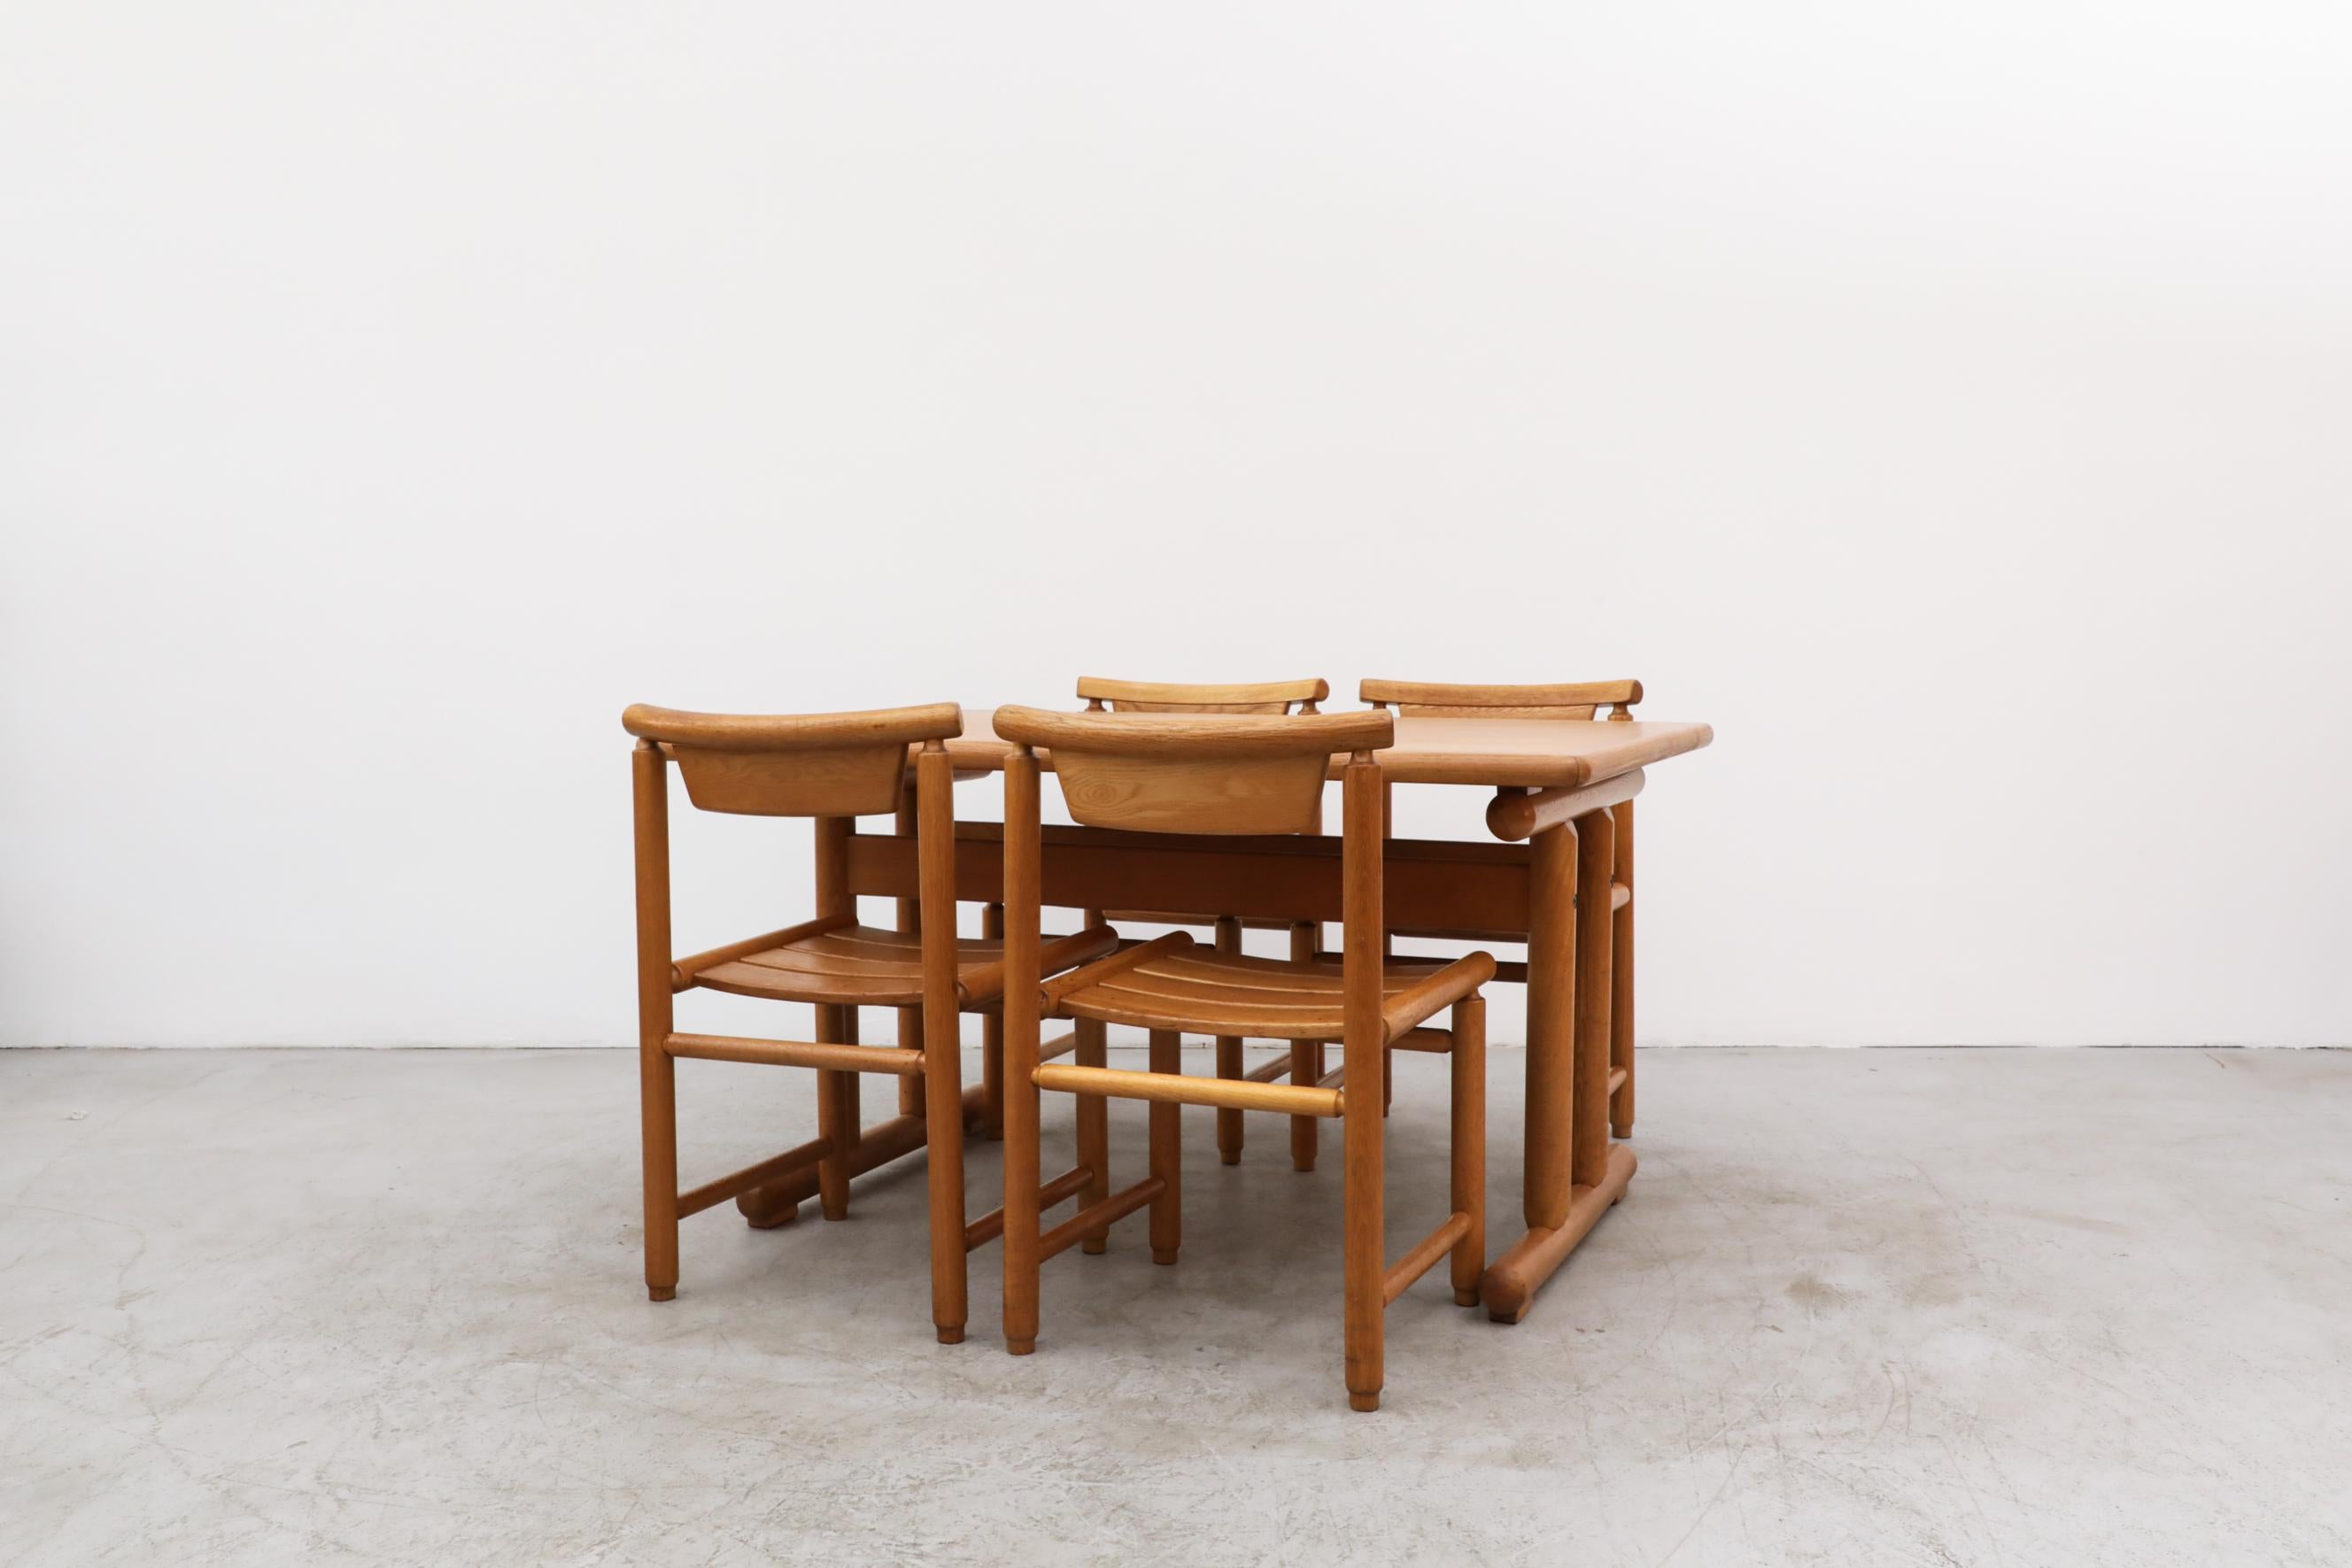 Ettore Sottsass meets Vico Magistretti in this MOD 70's designed oak dining set. Oak trestle table with soft edges and 4 matching side chairs. Lightly refinished set, in otherwise original condition. Wear is consistent with their age and use. The